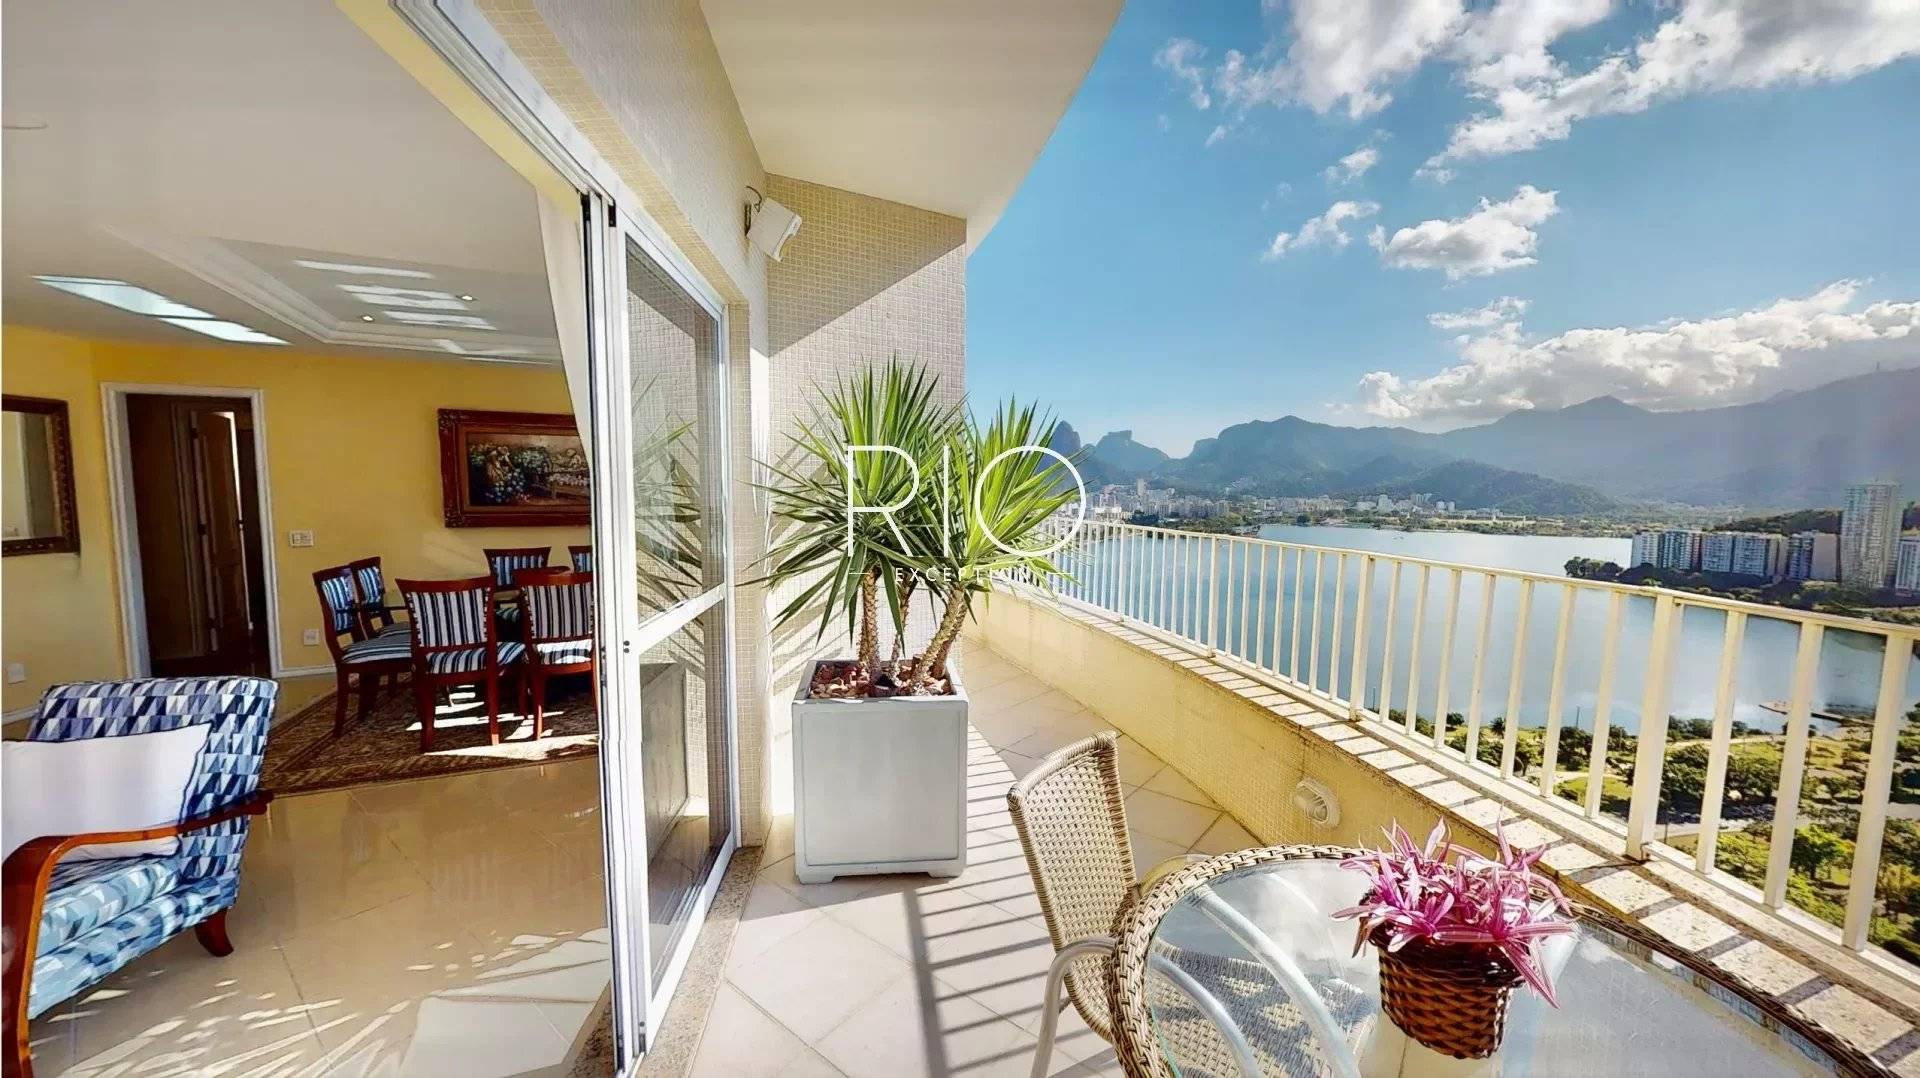 LAGOA - Spectacular 341m2 duplex penthouse with panoramic views of The Lagoon !